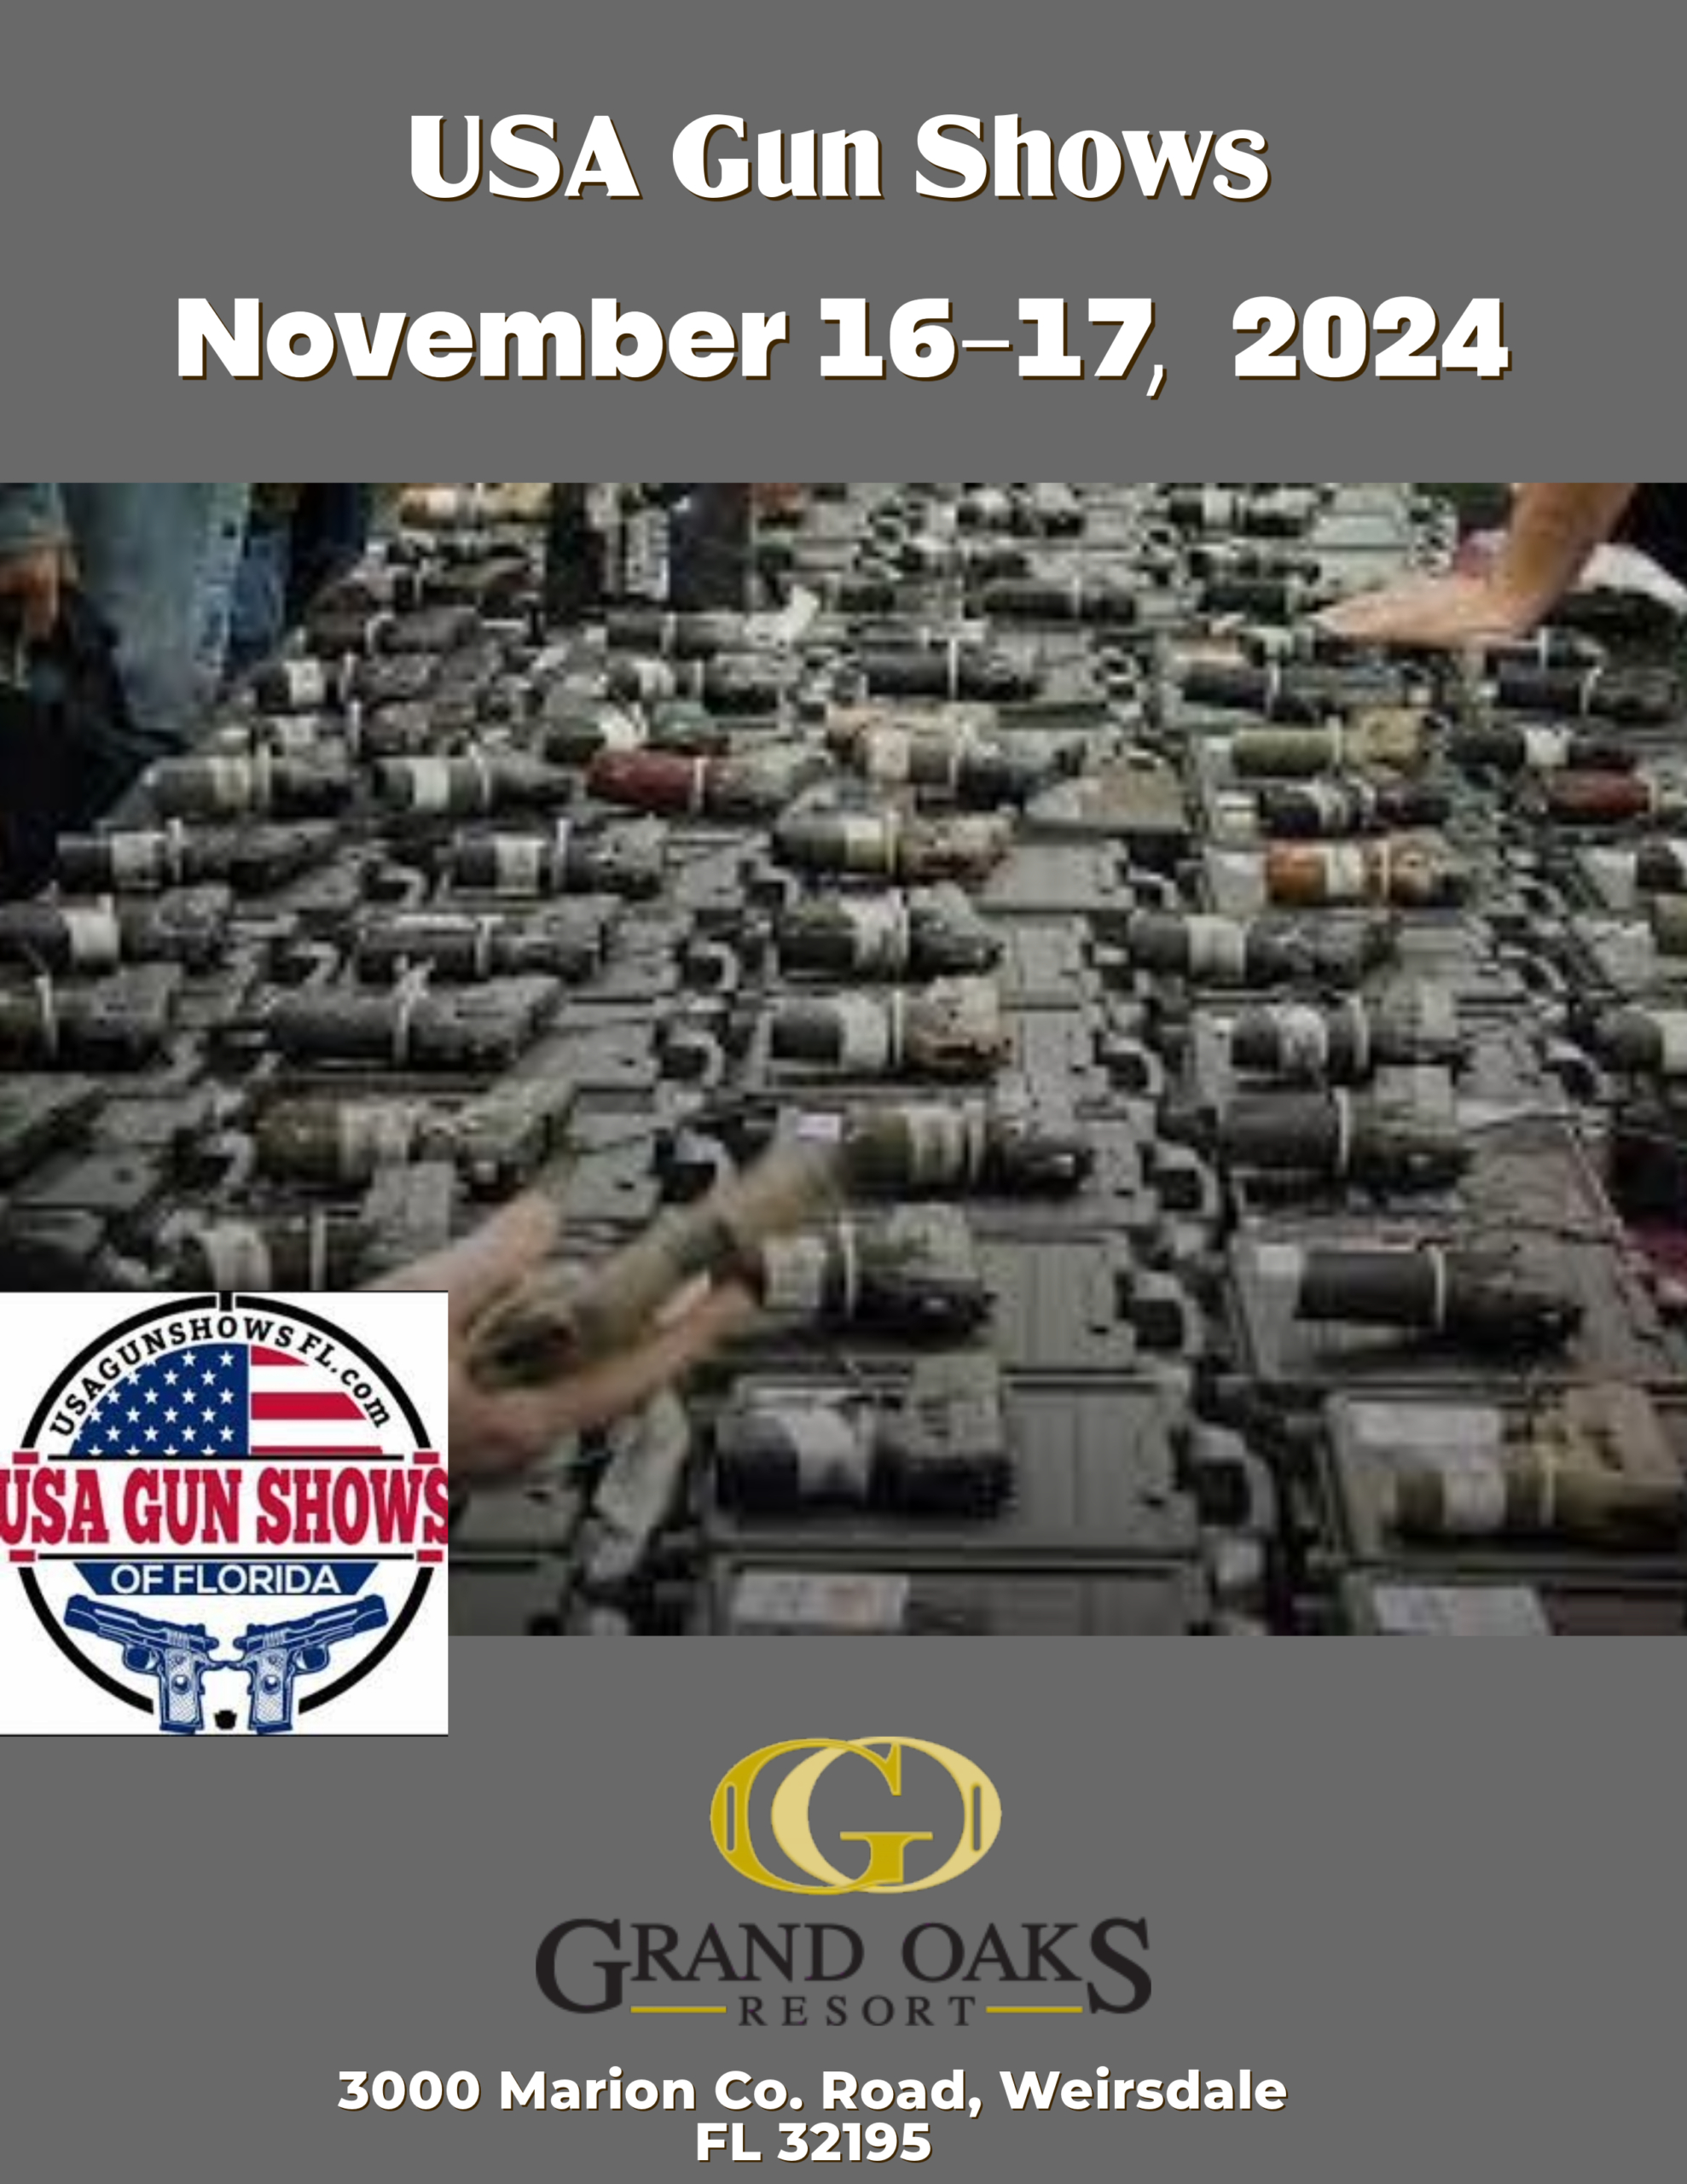 Gun Show at the Grand Oaks Resort in Weirsdale, Florida